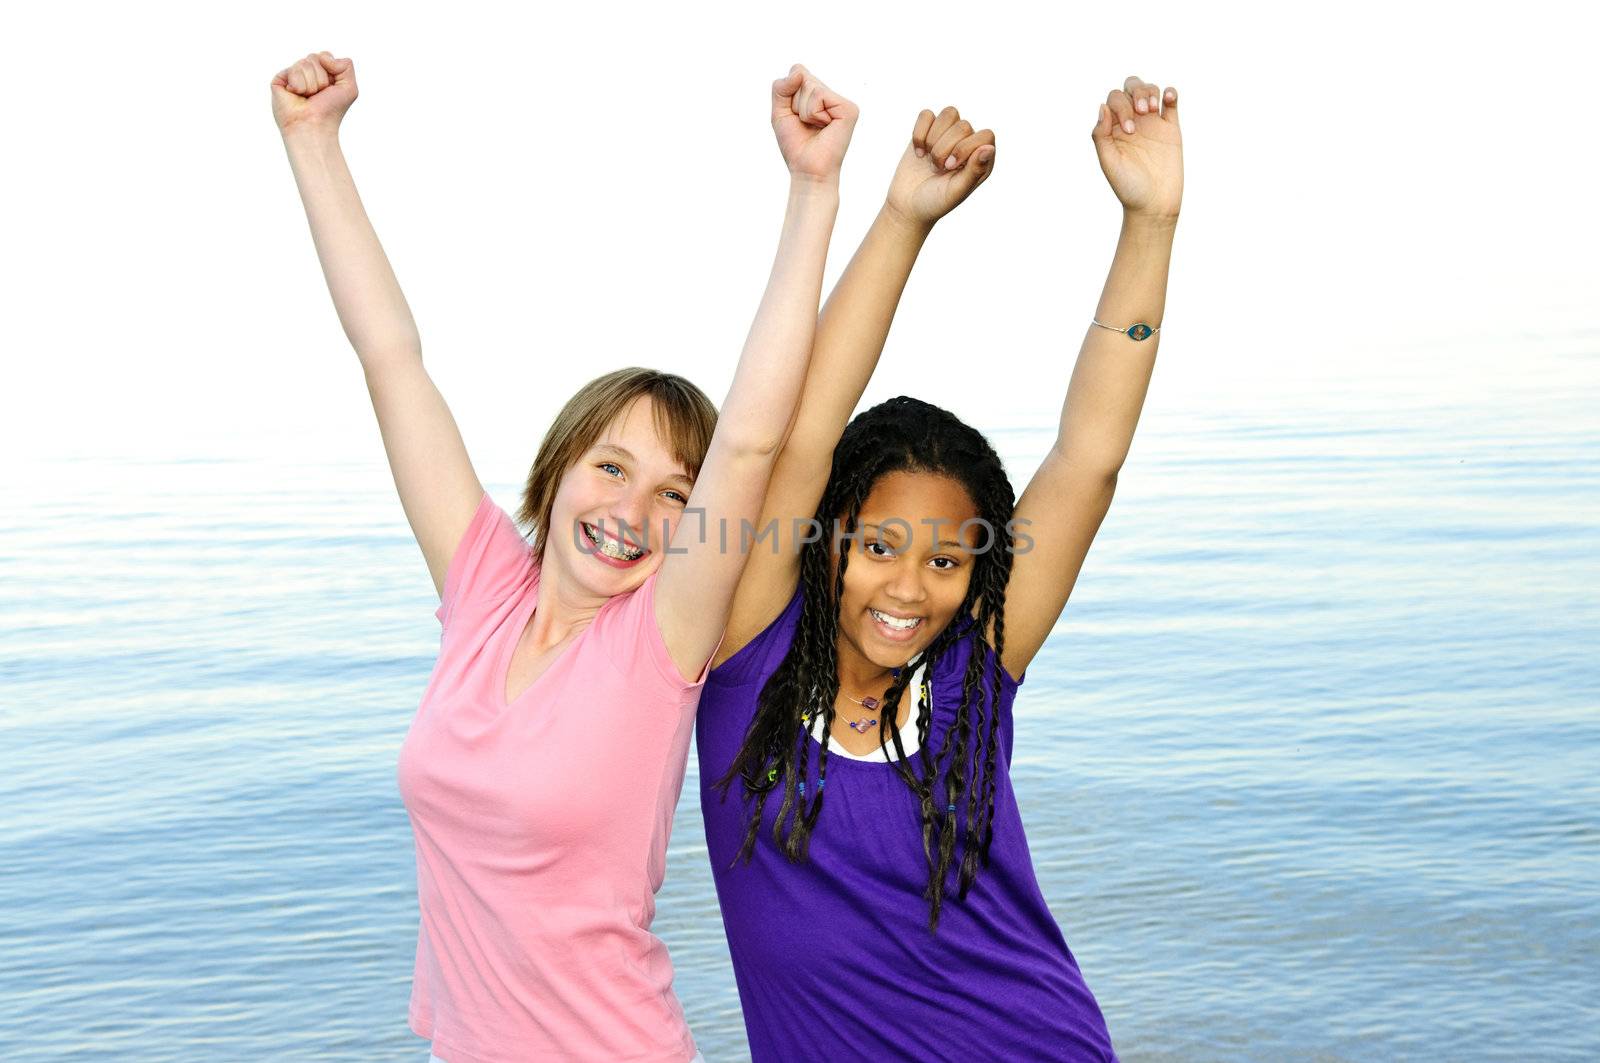 Portrait of two teenage girl friends raising arms